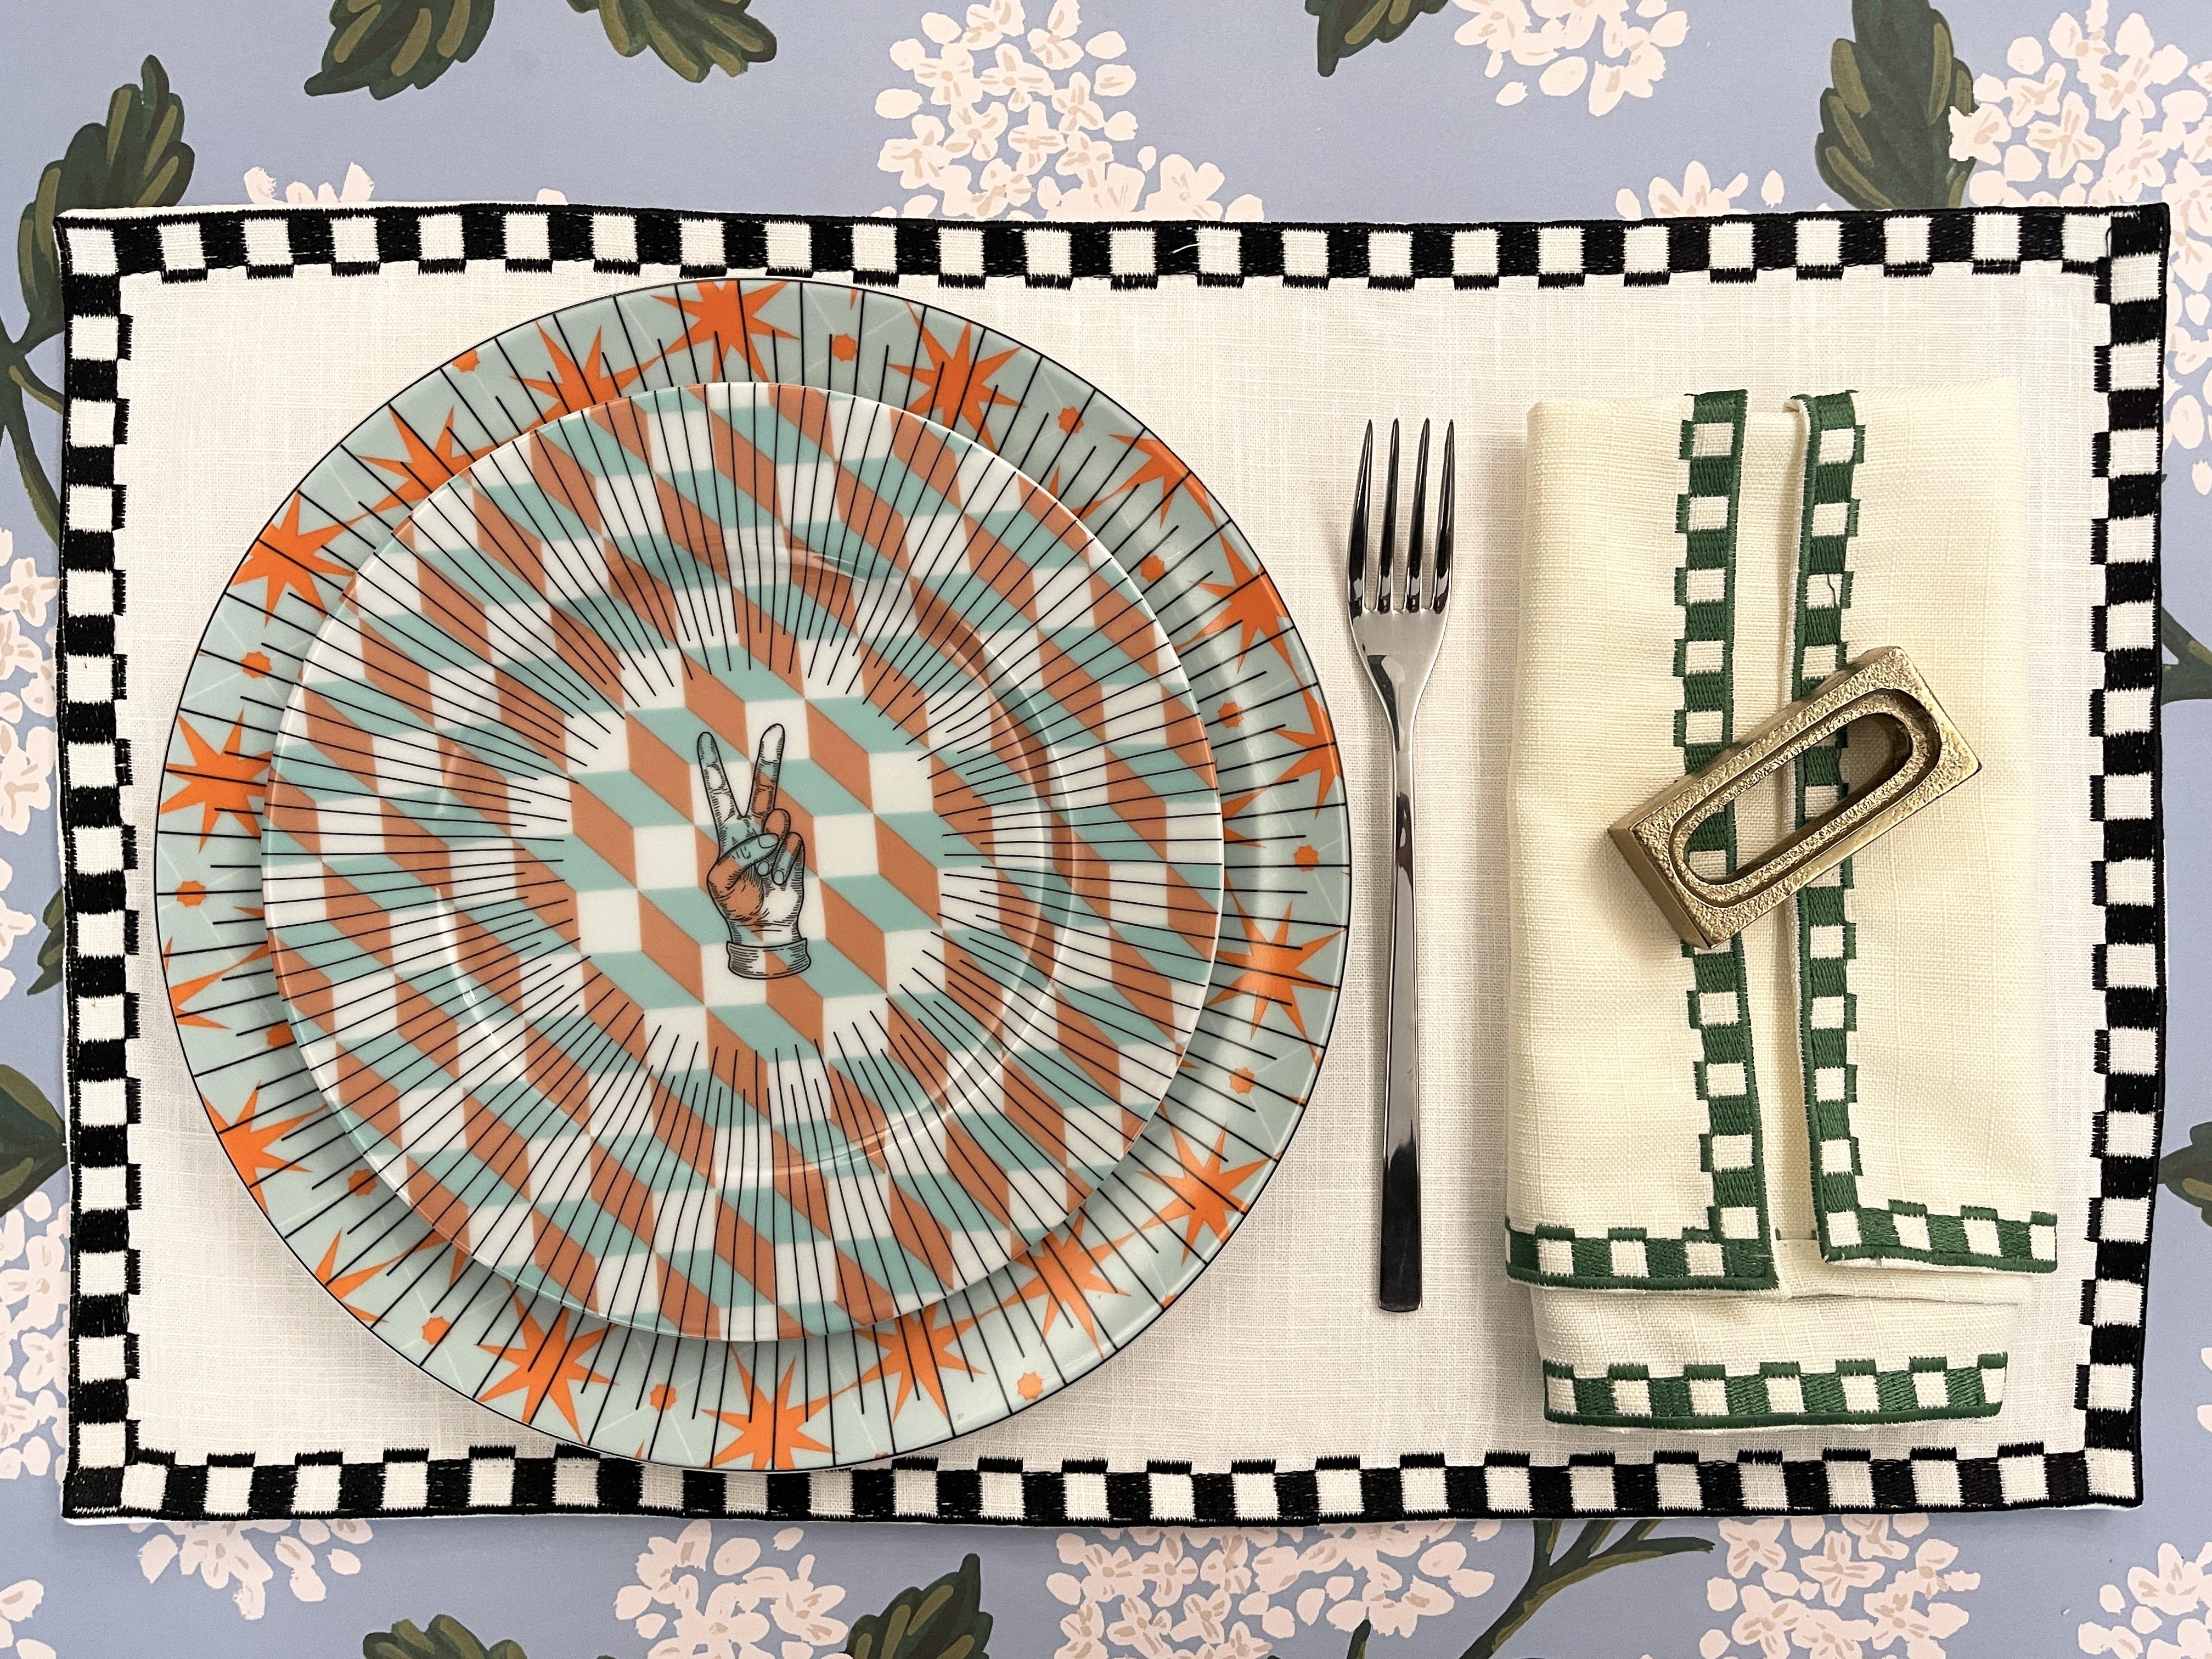 The Les Noelles placemat is a classic placemat that will elevate your dining experience. Made in 100% Linen, the naokin features embroidered geomterical patterns that online the edge and gives the napkin a polished look. This is a set of 4